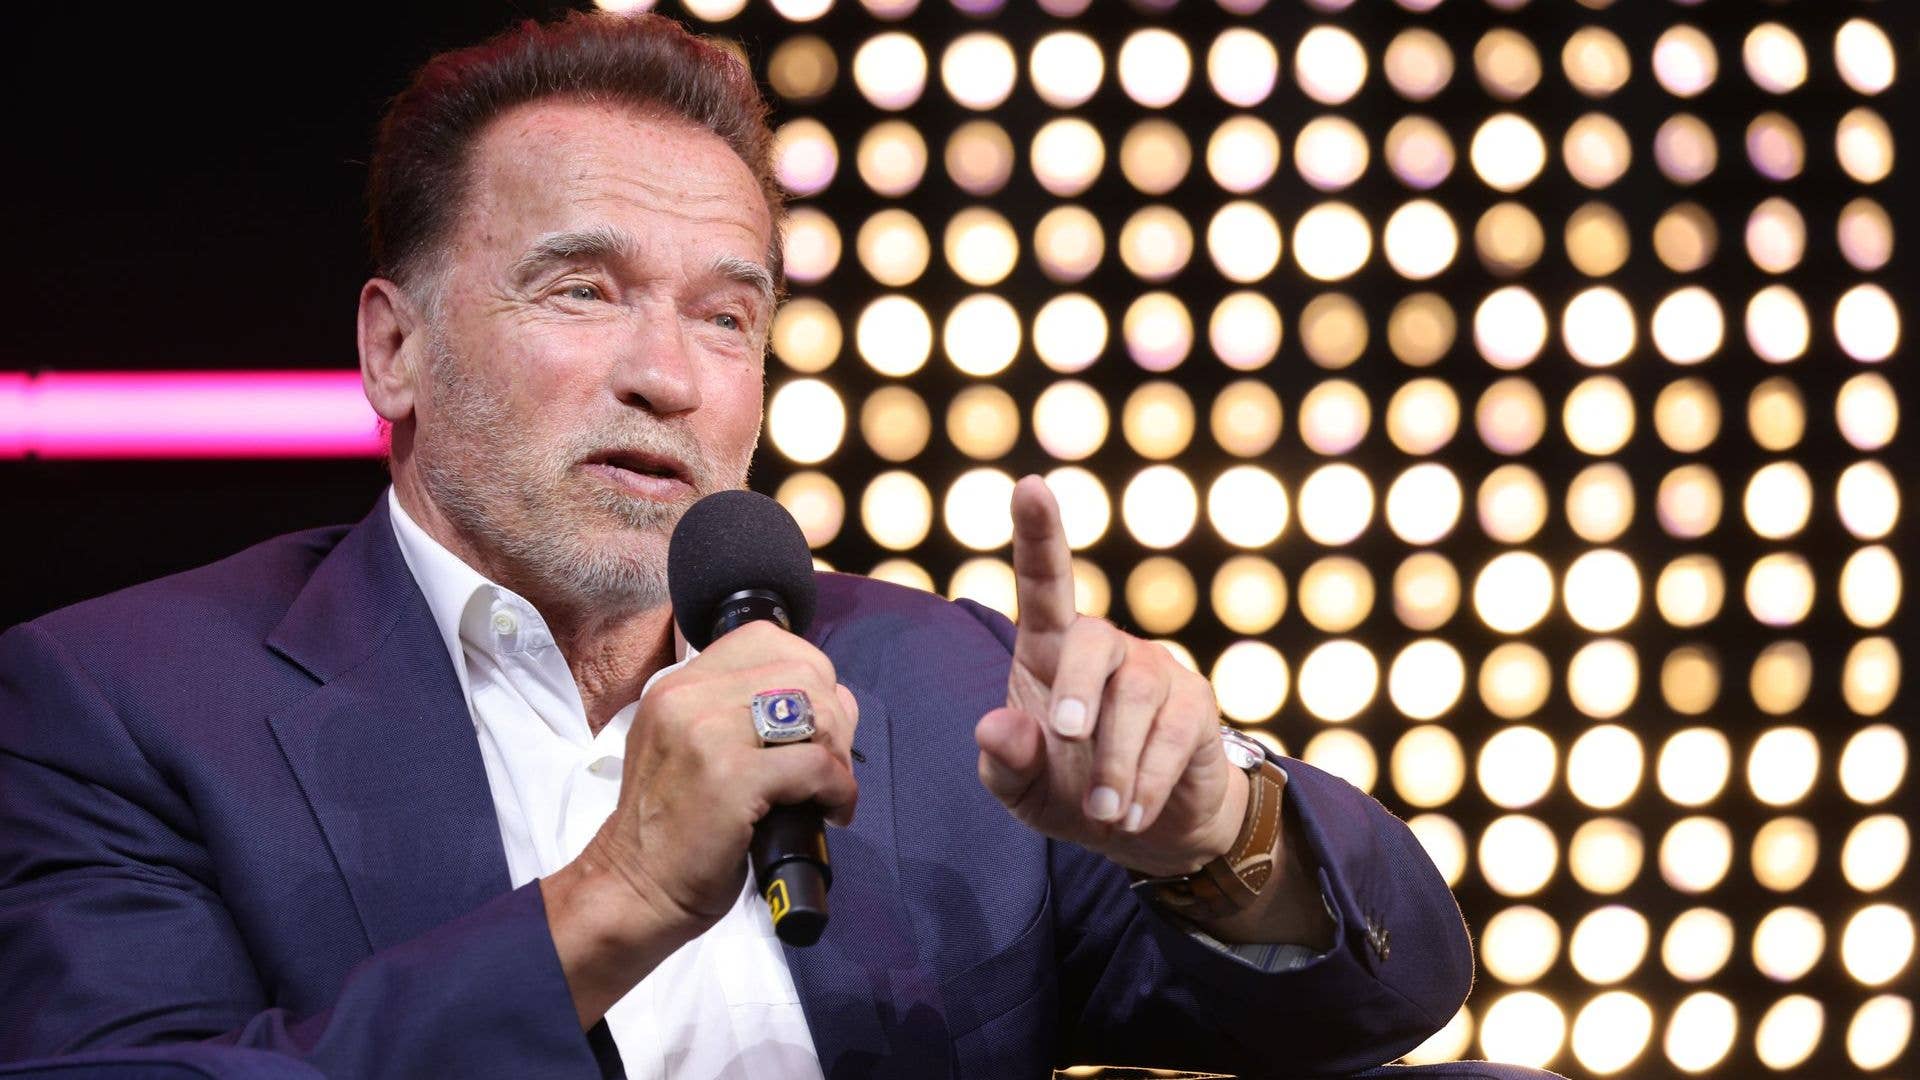 Arnold Schwarzenegger speaks in his keynote about digital sustainability during the Digital X event